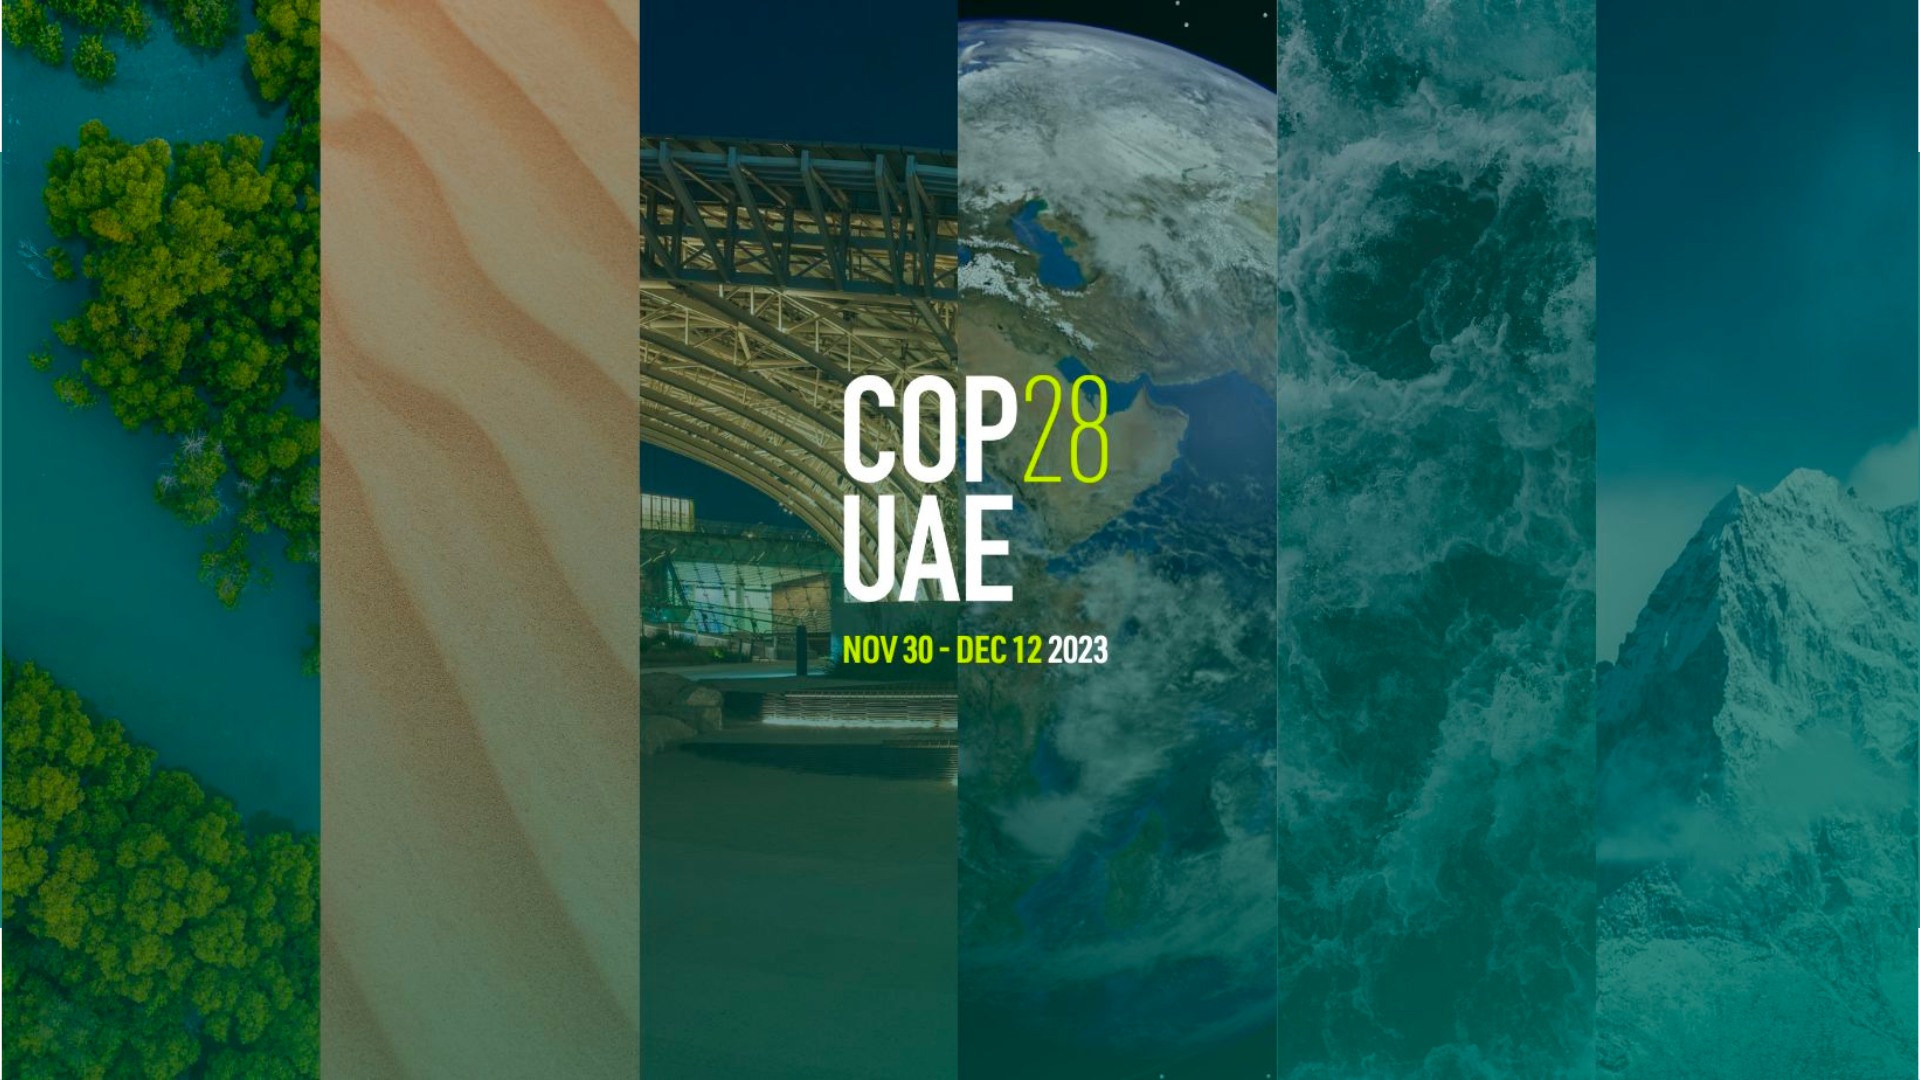 COP 28 UAE composite image with climate references